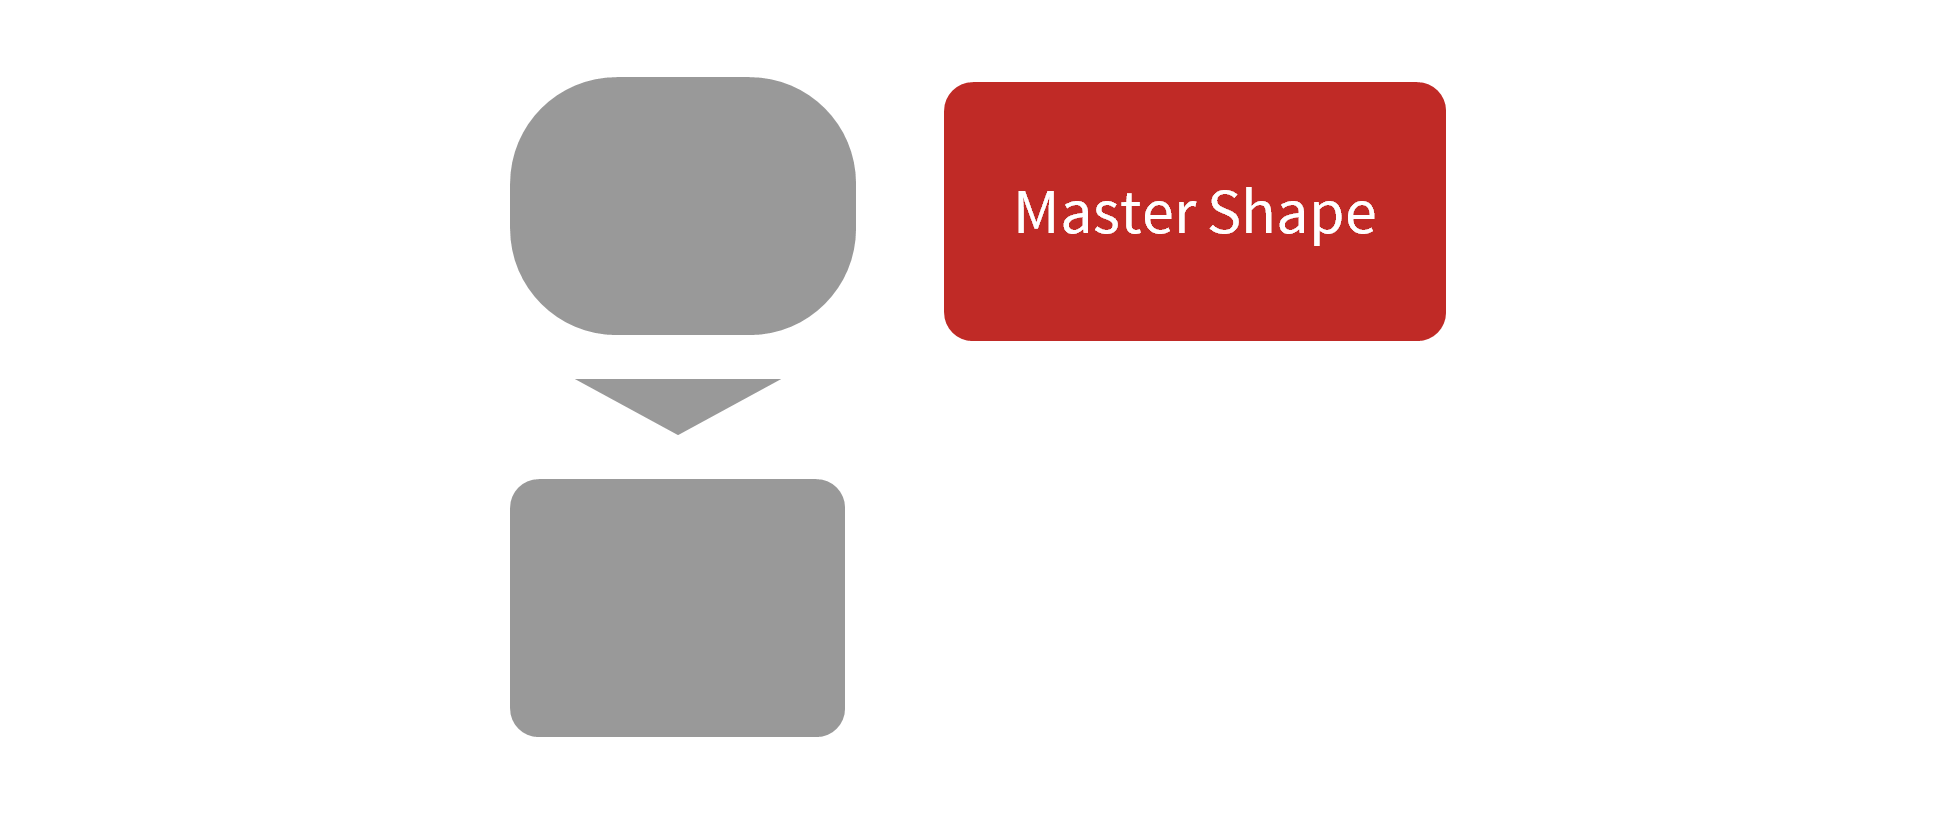 Align Rounded Rectangles